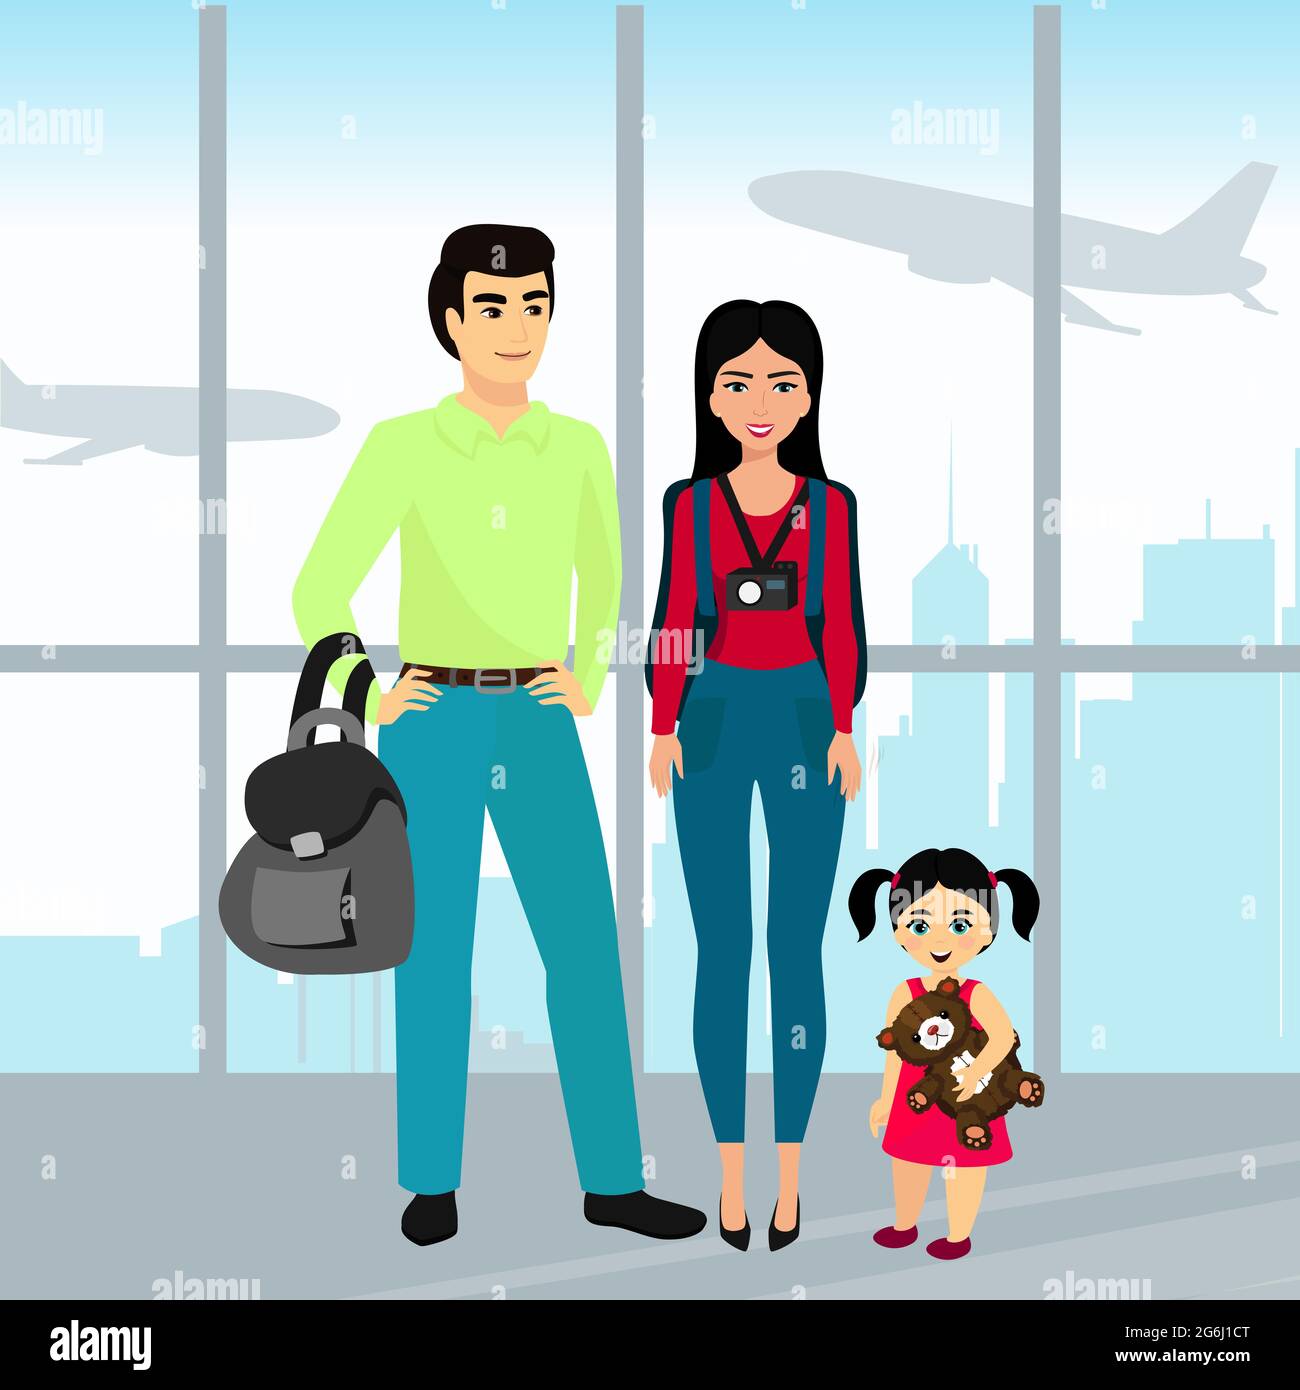 Vector illustration traveling family with luggage in the airport building. Father, mother and daughter travel together in cartoon flat style. Stock Vector